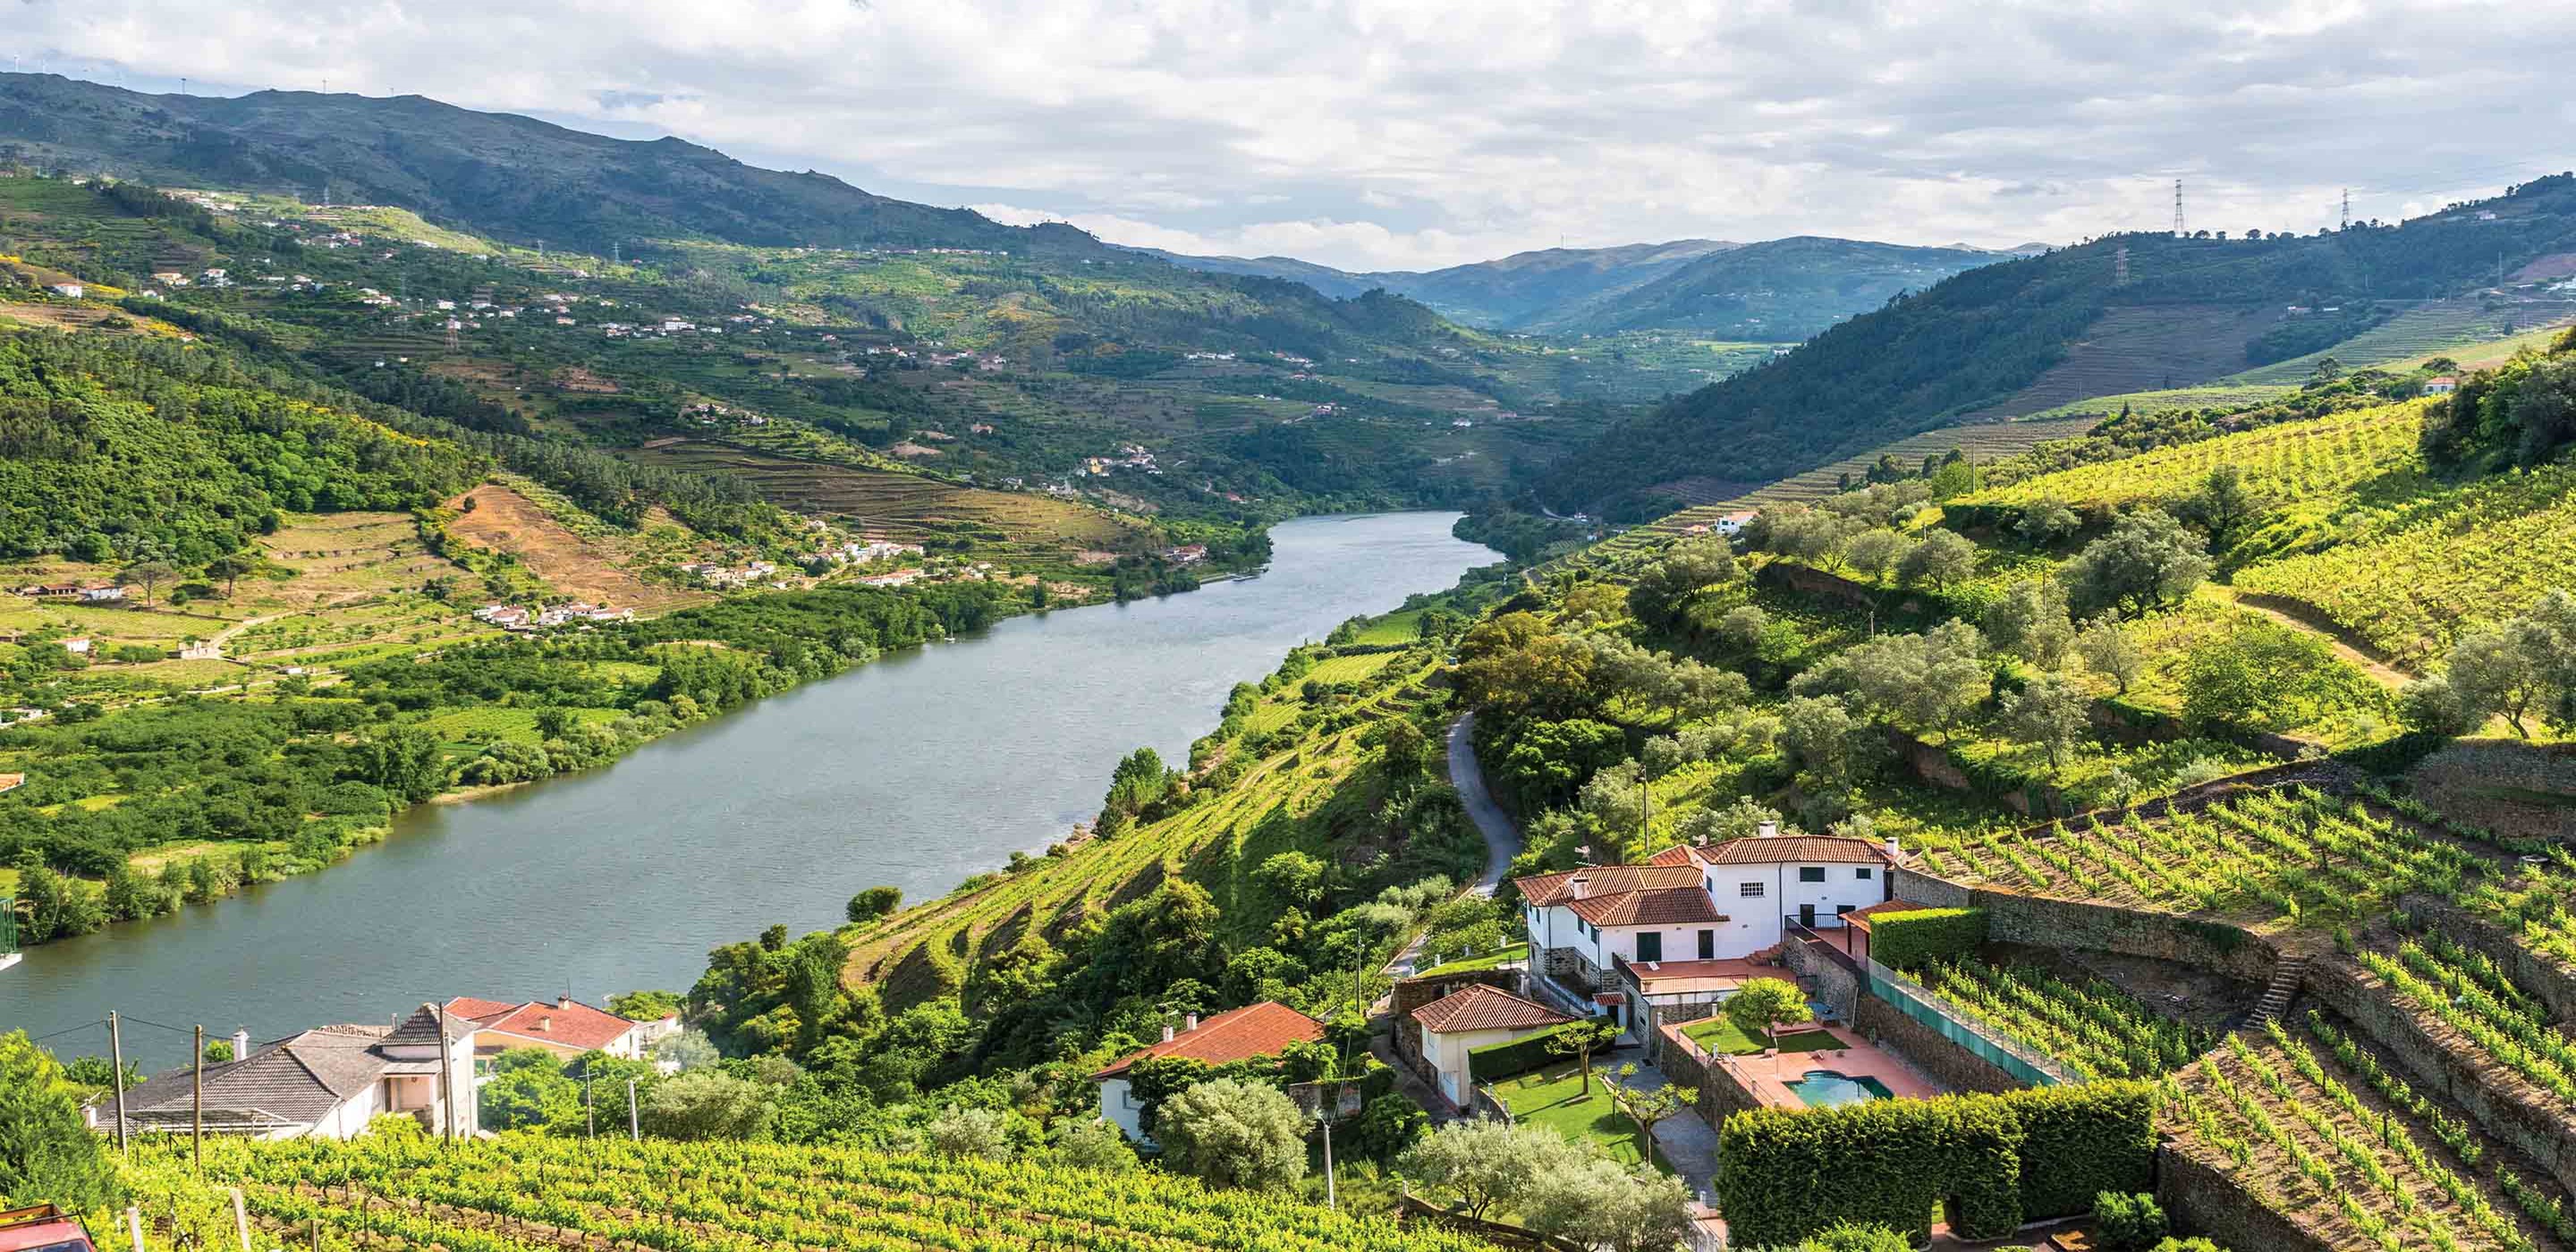 douro valley river cruise day trip